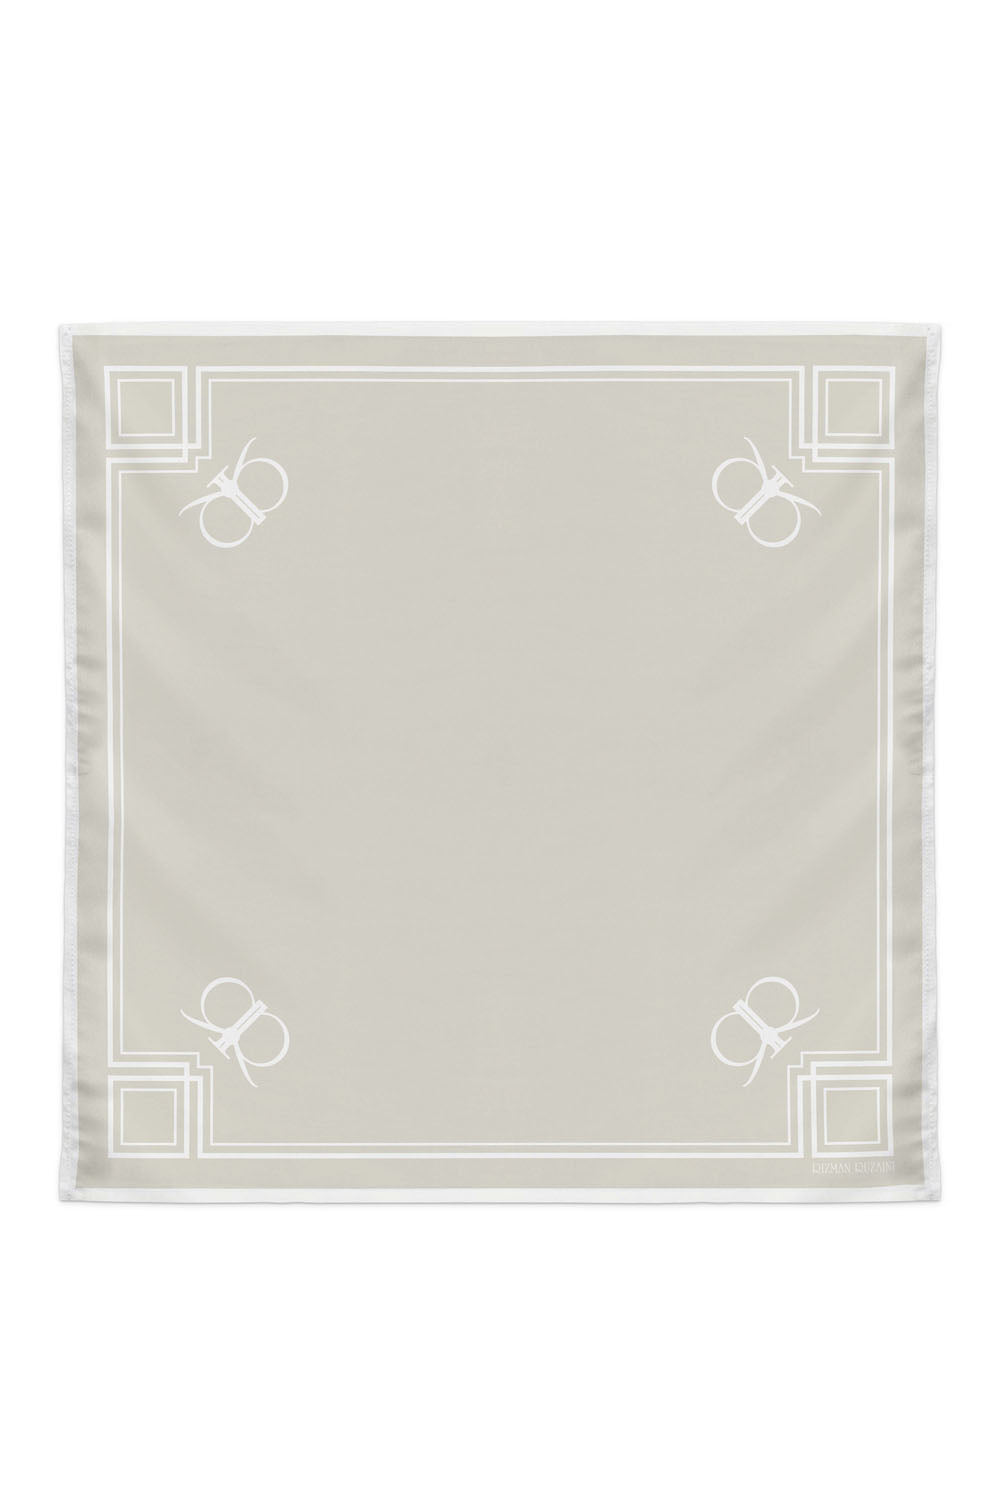 RR Timeless Cotton Scarf in Beige